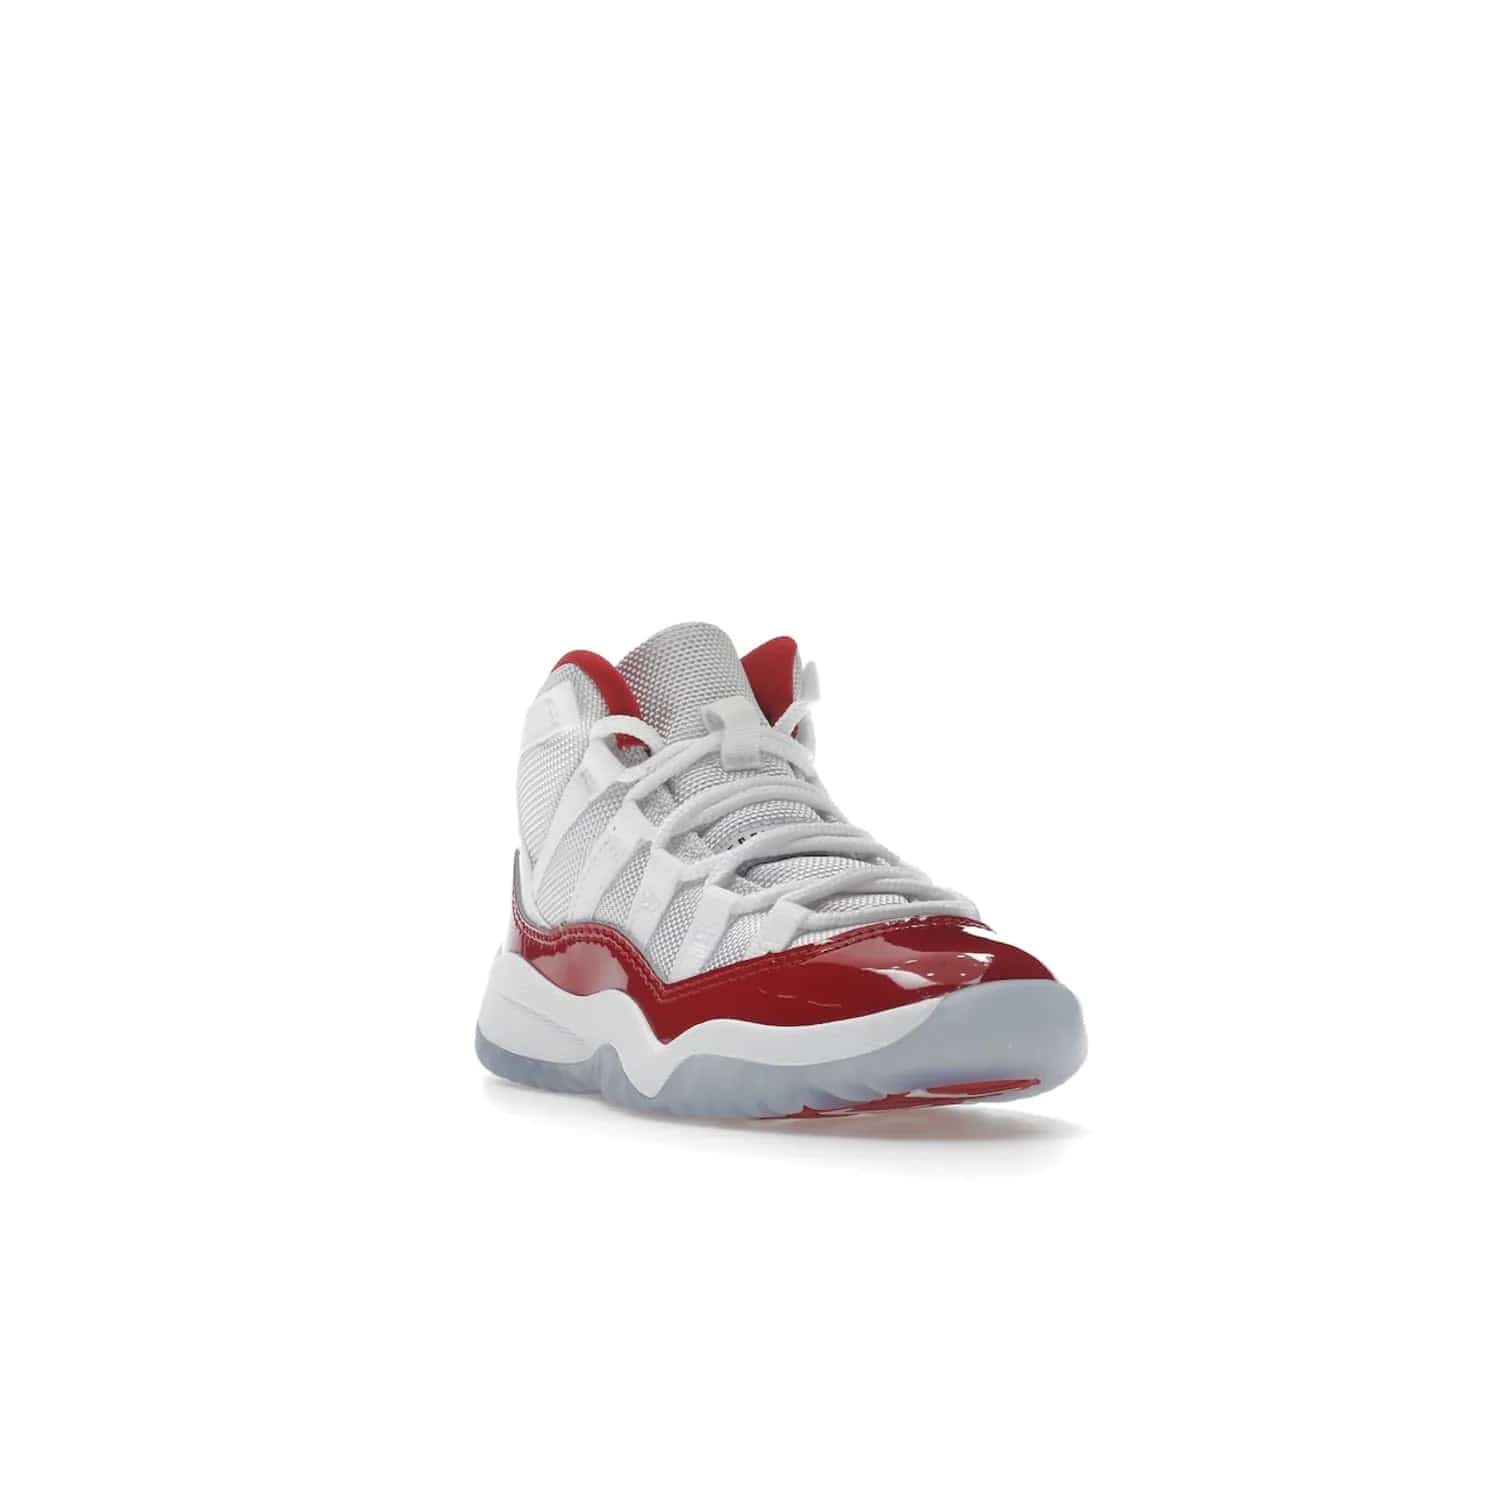 Jordan 11 Retro Cherry (2022) (PS) - Image 7 - Only at www.BallersClubKickz.com - An iconic silhouette with a timeless look, the Air Jordan 11 Retro Cherry 2022 PS features a crisp White, Varsity Red and Black colorway. The upper is made of ballistic mesh, a red patent leather mudguard, '23' branding and white Phylon midsole. Get optimal cushioning and comfort on December 10th, 2022. Don't miss out.